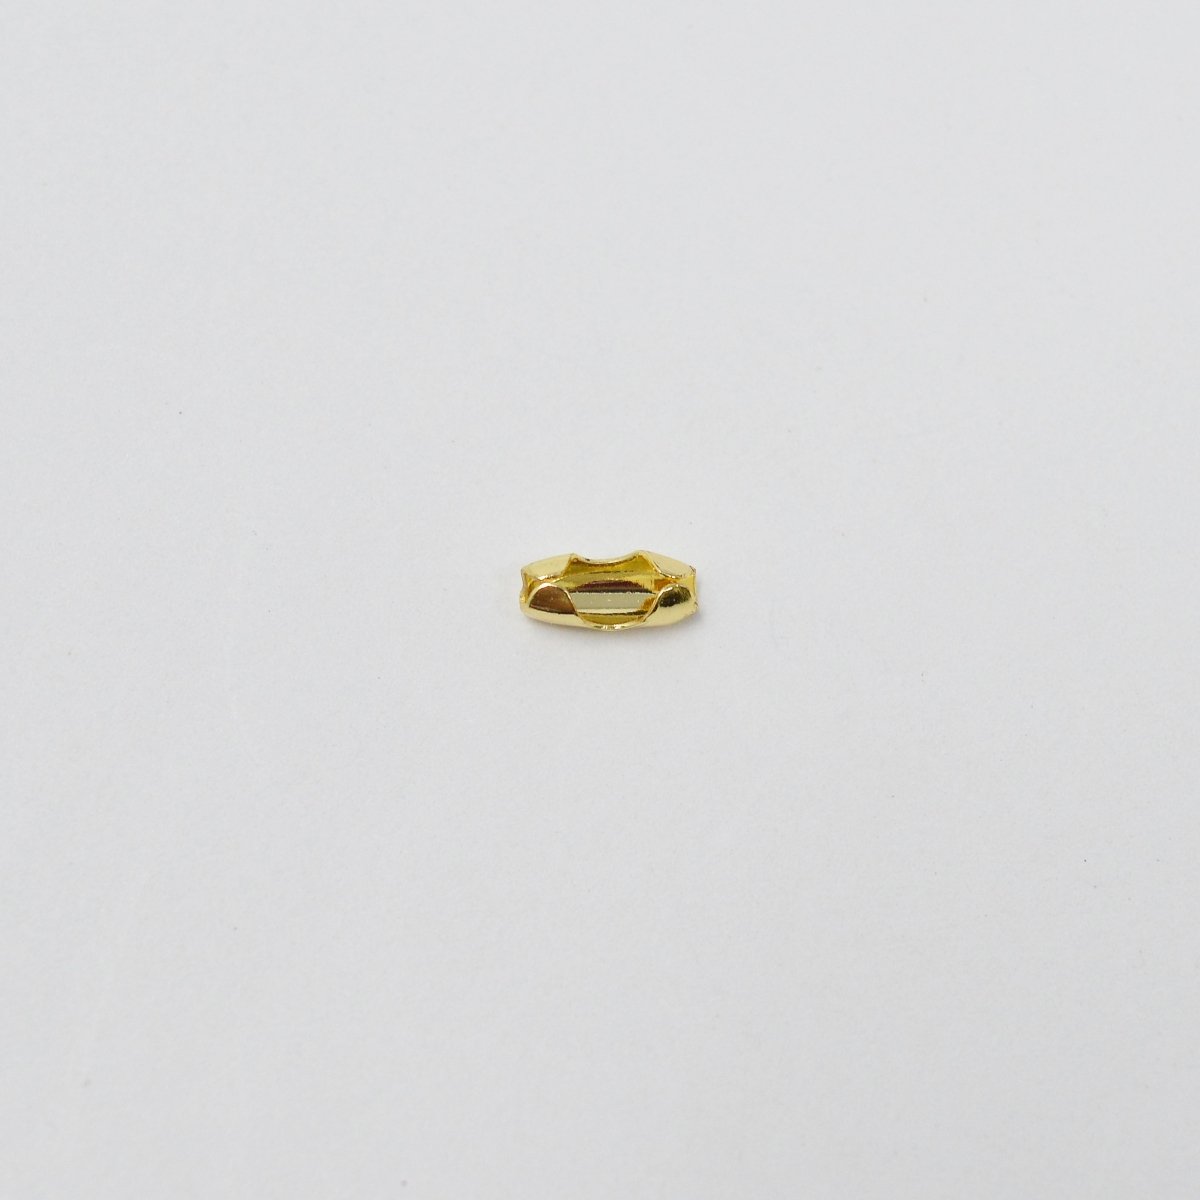 14K Gold Filled Tiny Tube Crimp Beads Tag Fastener Jewelry Making For DIY Jewelry Making Necklace Bracelet Anklet Supplies L-165 - DLUXCA